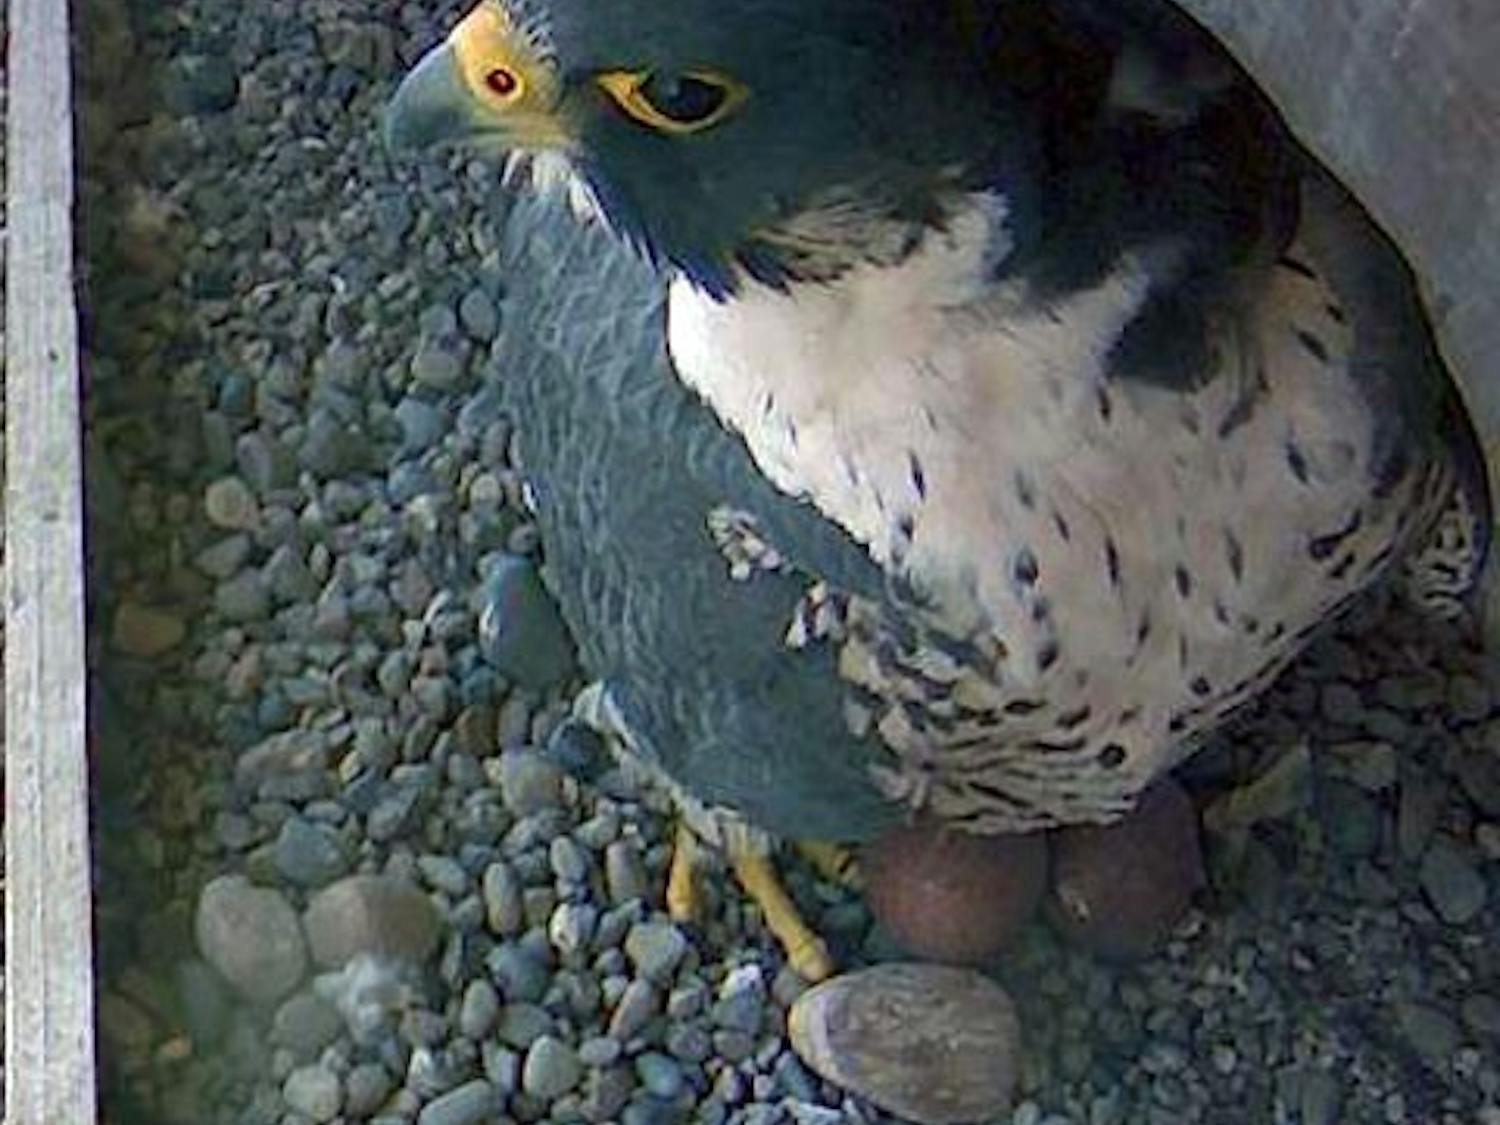 A peregrine falcon incubates two eggs in the nesting box installed in Mackay [Heating Plant] on South Campus. This May, two eggs were laid by mother falcon, Dixie.